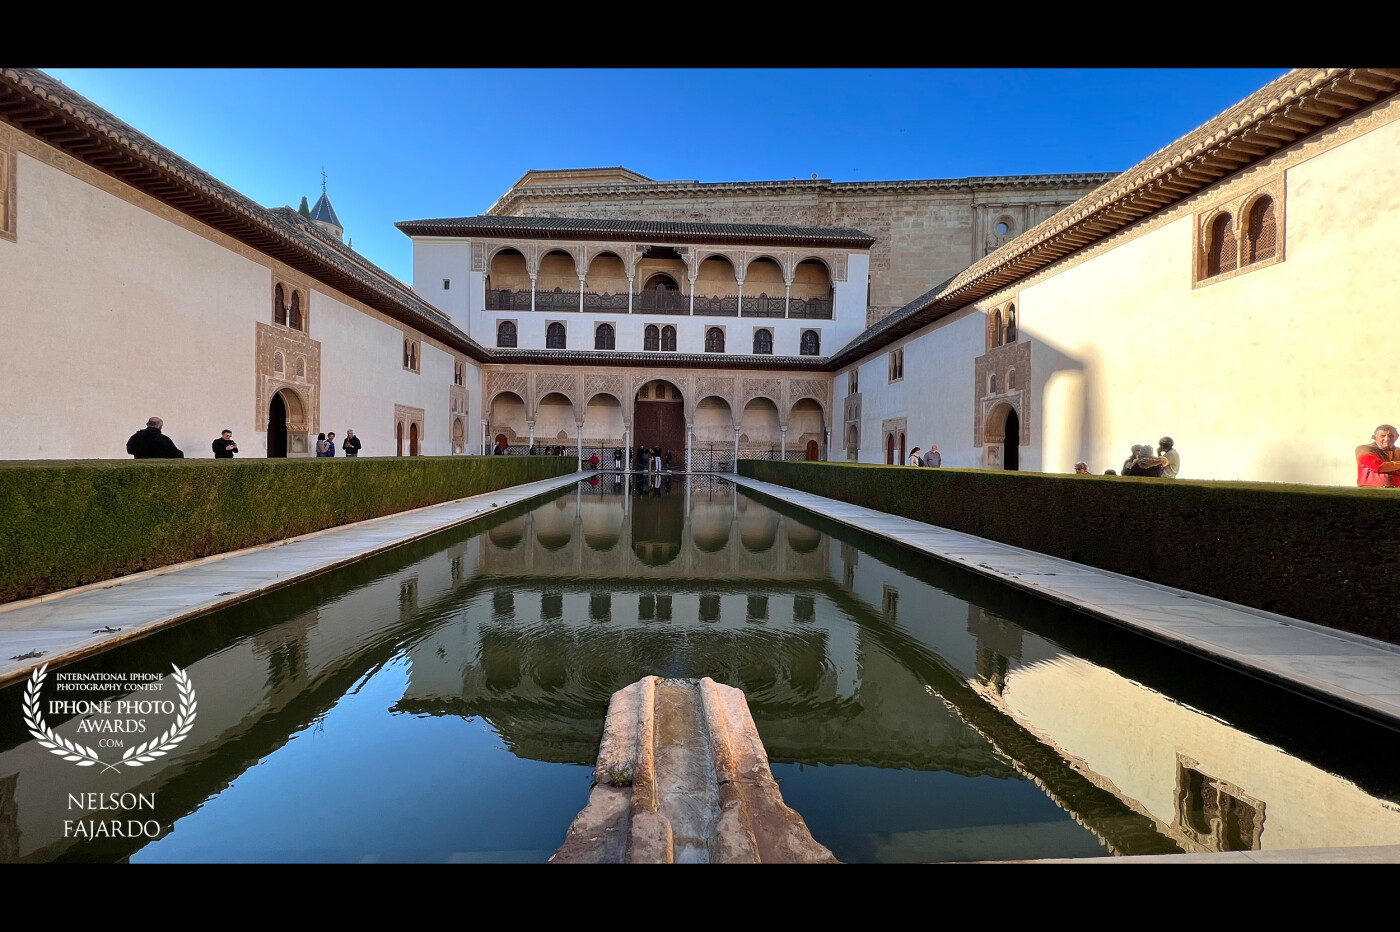 A reflection of the inner palace section in Alhambra, Spain with bright sunlight and clear sky.